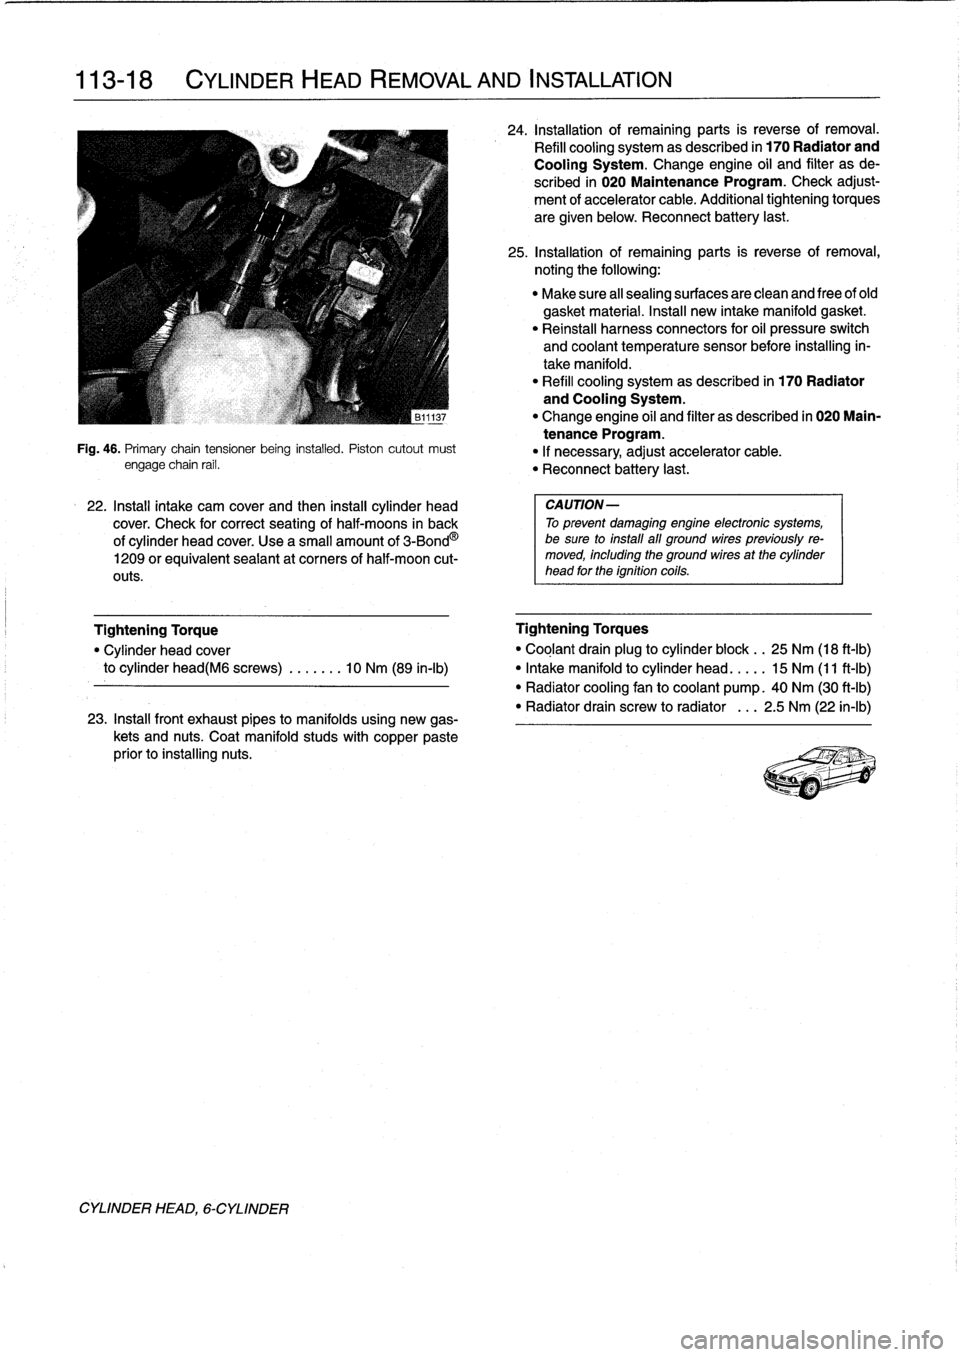 BMW 318i 1997 E36 Workshop Manual 
113-
1
8

	

CYLINDER
HEAD
REMOVAL
AND
INSTALLATION

CYLINDER
HEAD,
6-CYLINDER

Fig
.
46
.
Primary
chaintensioner
being
installed
.
Piston
cutout
must
engage
chain
rail
.

22
.
Install
intake
cam
cov